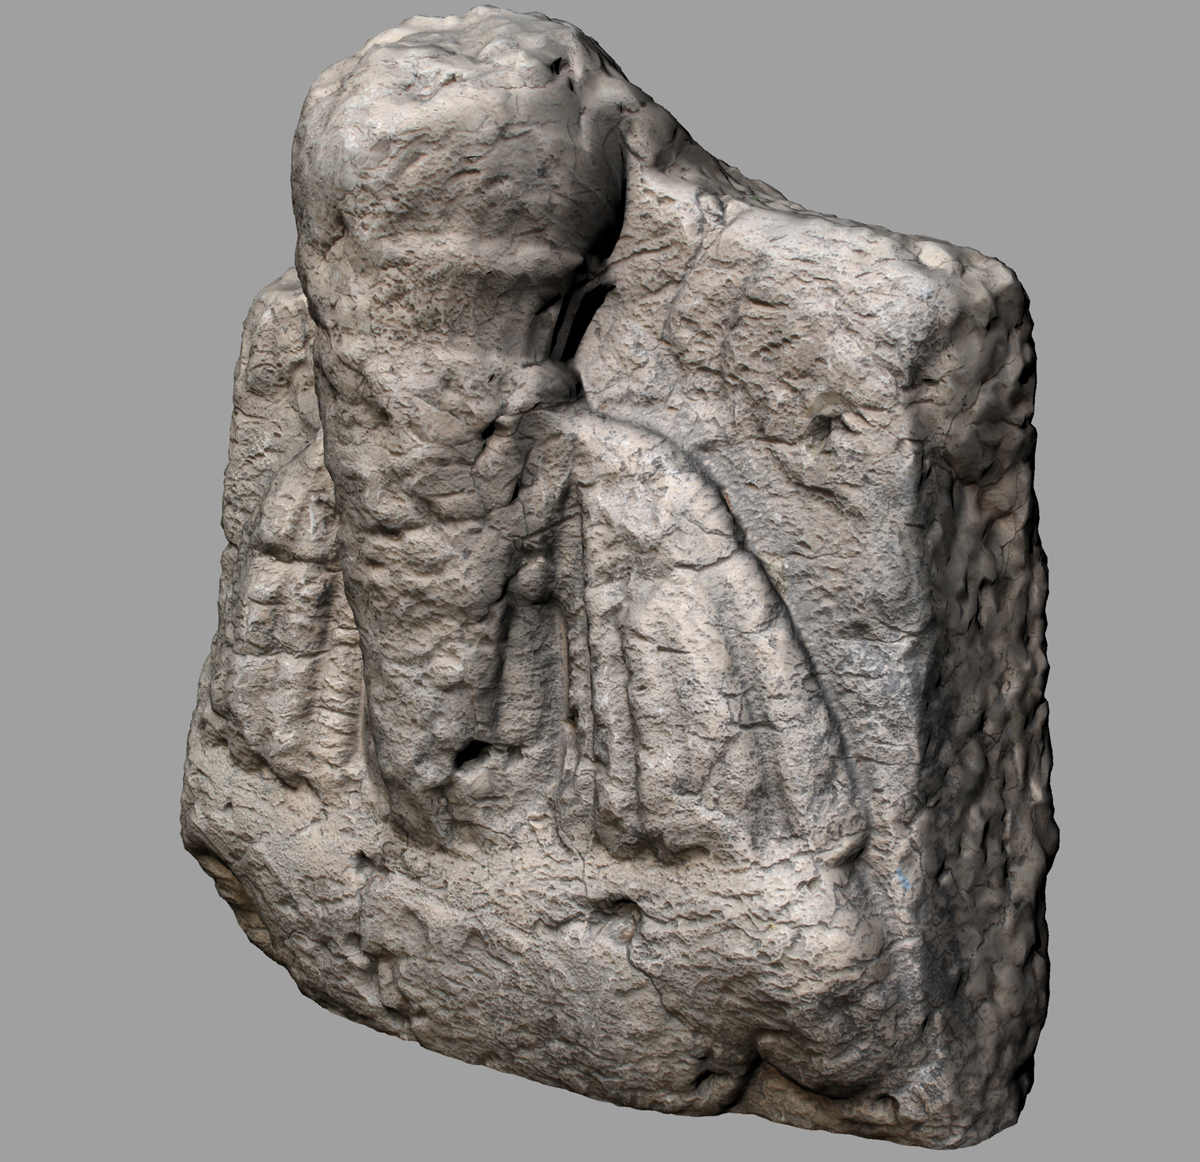 3D Rendering of a monumental bust of the Sasanian king Narseh that once decorated the Paikuli Monument (Image: MAIKI-Studio3R)